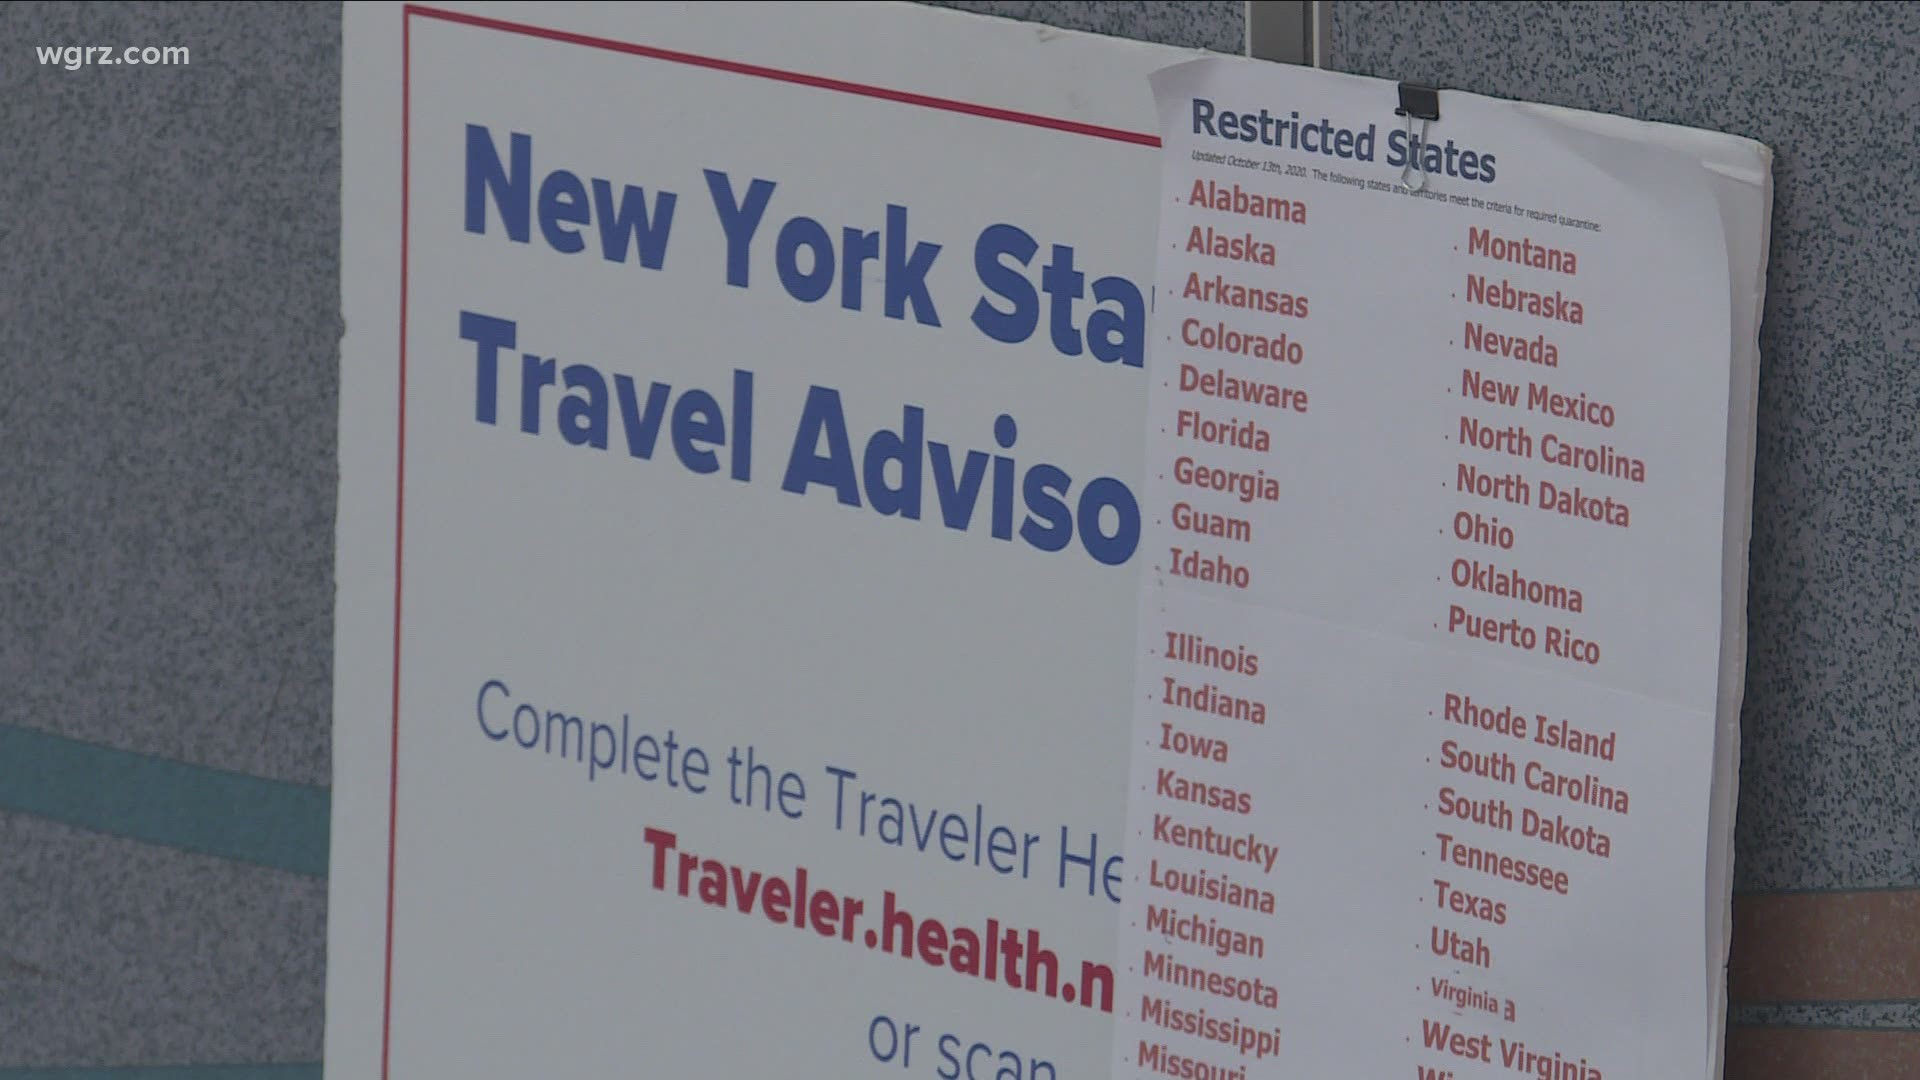 Tomorrow New York will produce its latest weekly travel advisory, of states where the covid 19 rates are high enough, that those entering New York from those states,